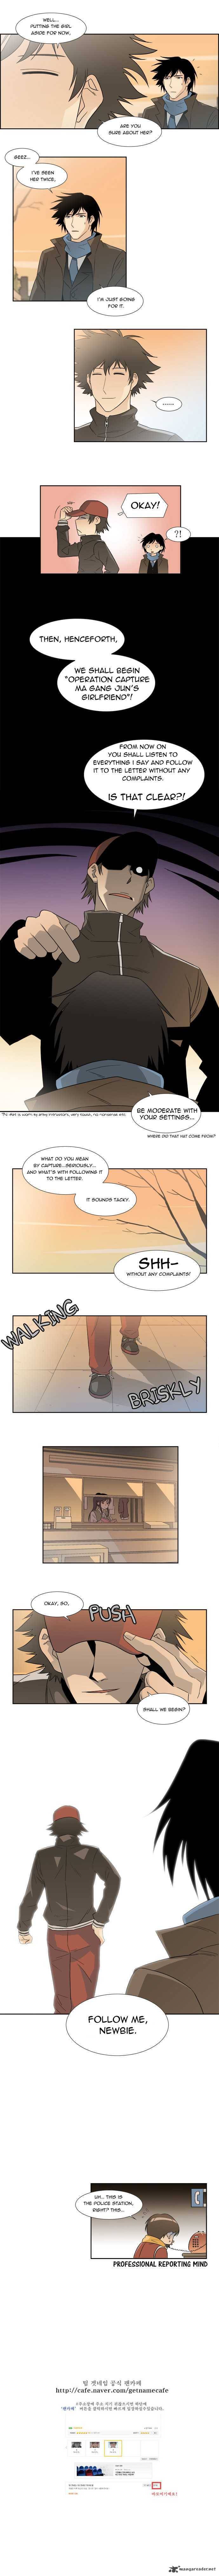 Melo Holic Chapter 7 Page 5